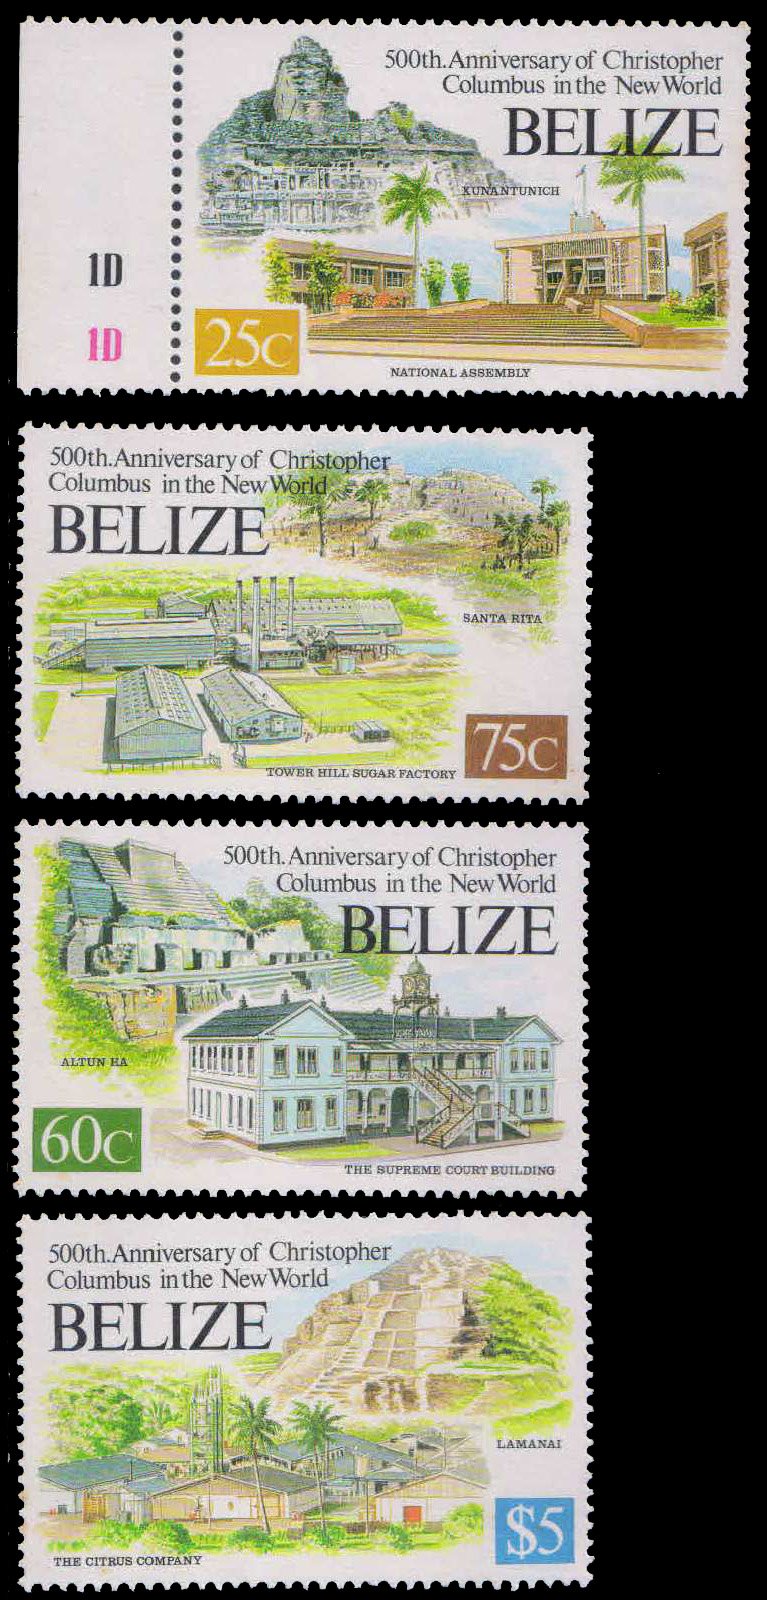 BELIZE 1992-500th Anniv. of Discovery of America by Columbus, Mayan Sites & Modern Building, Set of 4, MNH, S.G. 1130-33